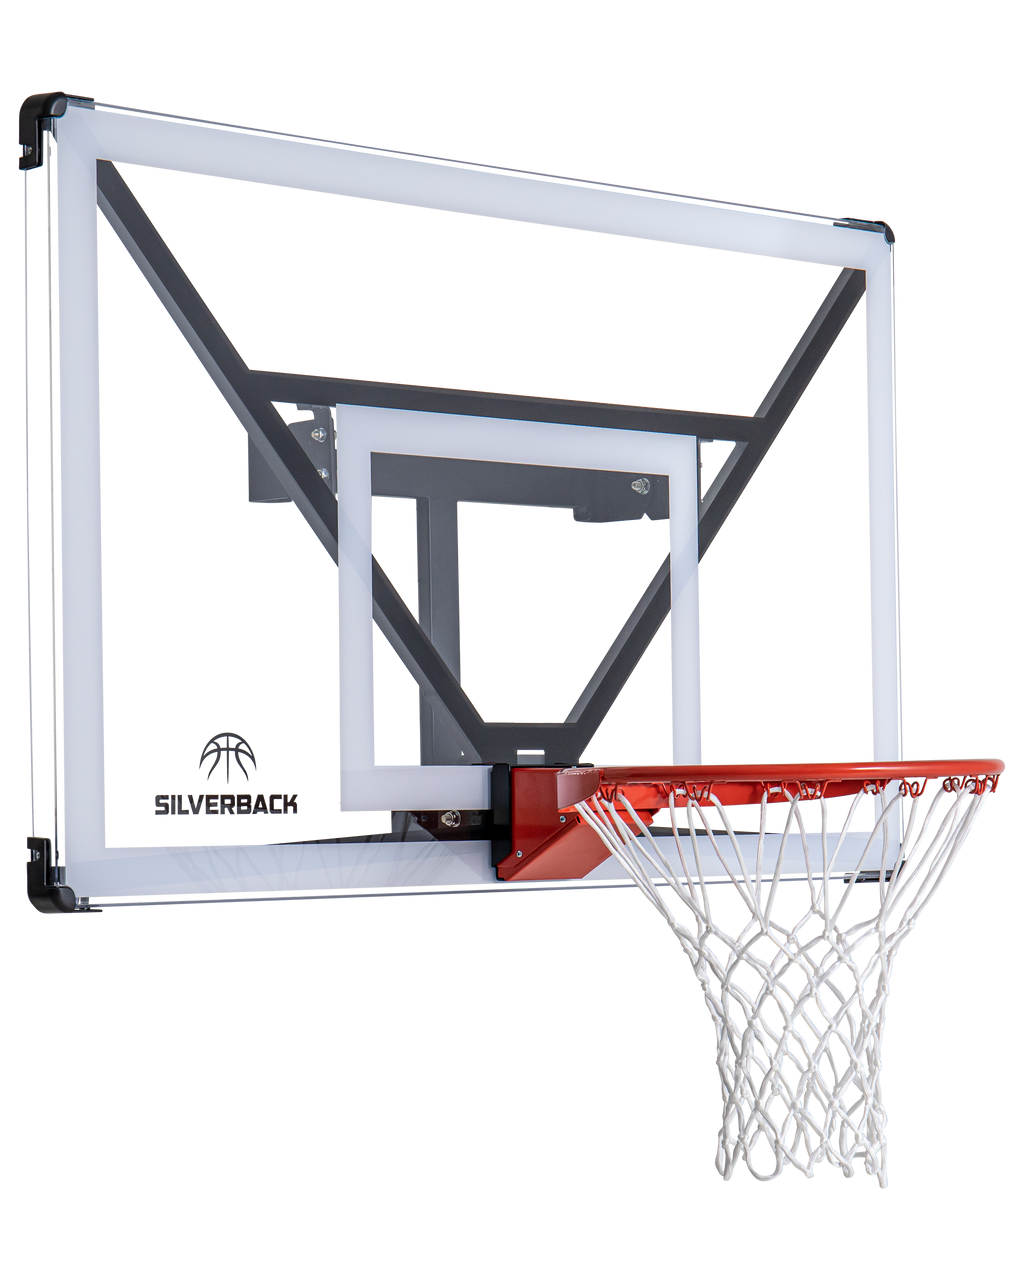 Silverback NXT 54 Wall Mounted Adjustable-Height Basketball Hoop with QUICKPLAY